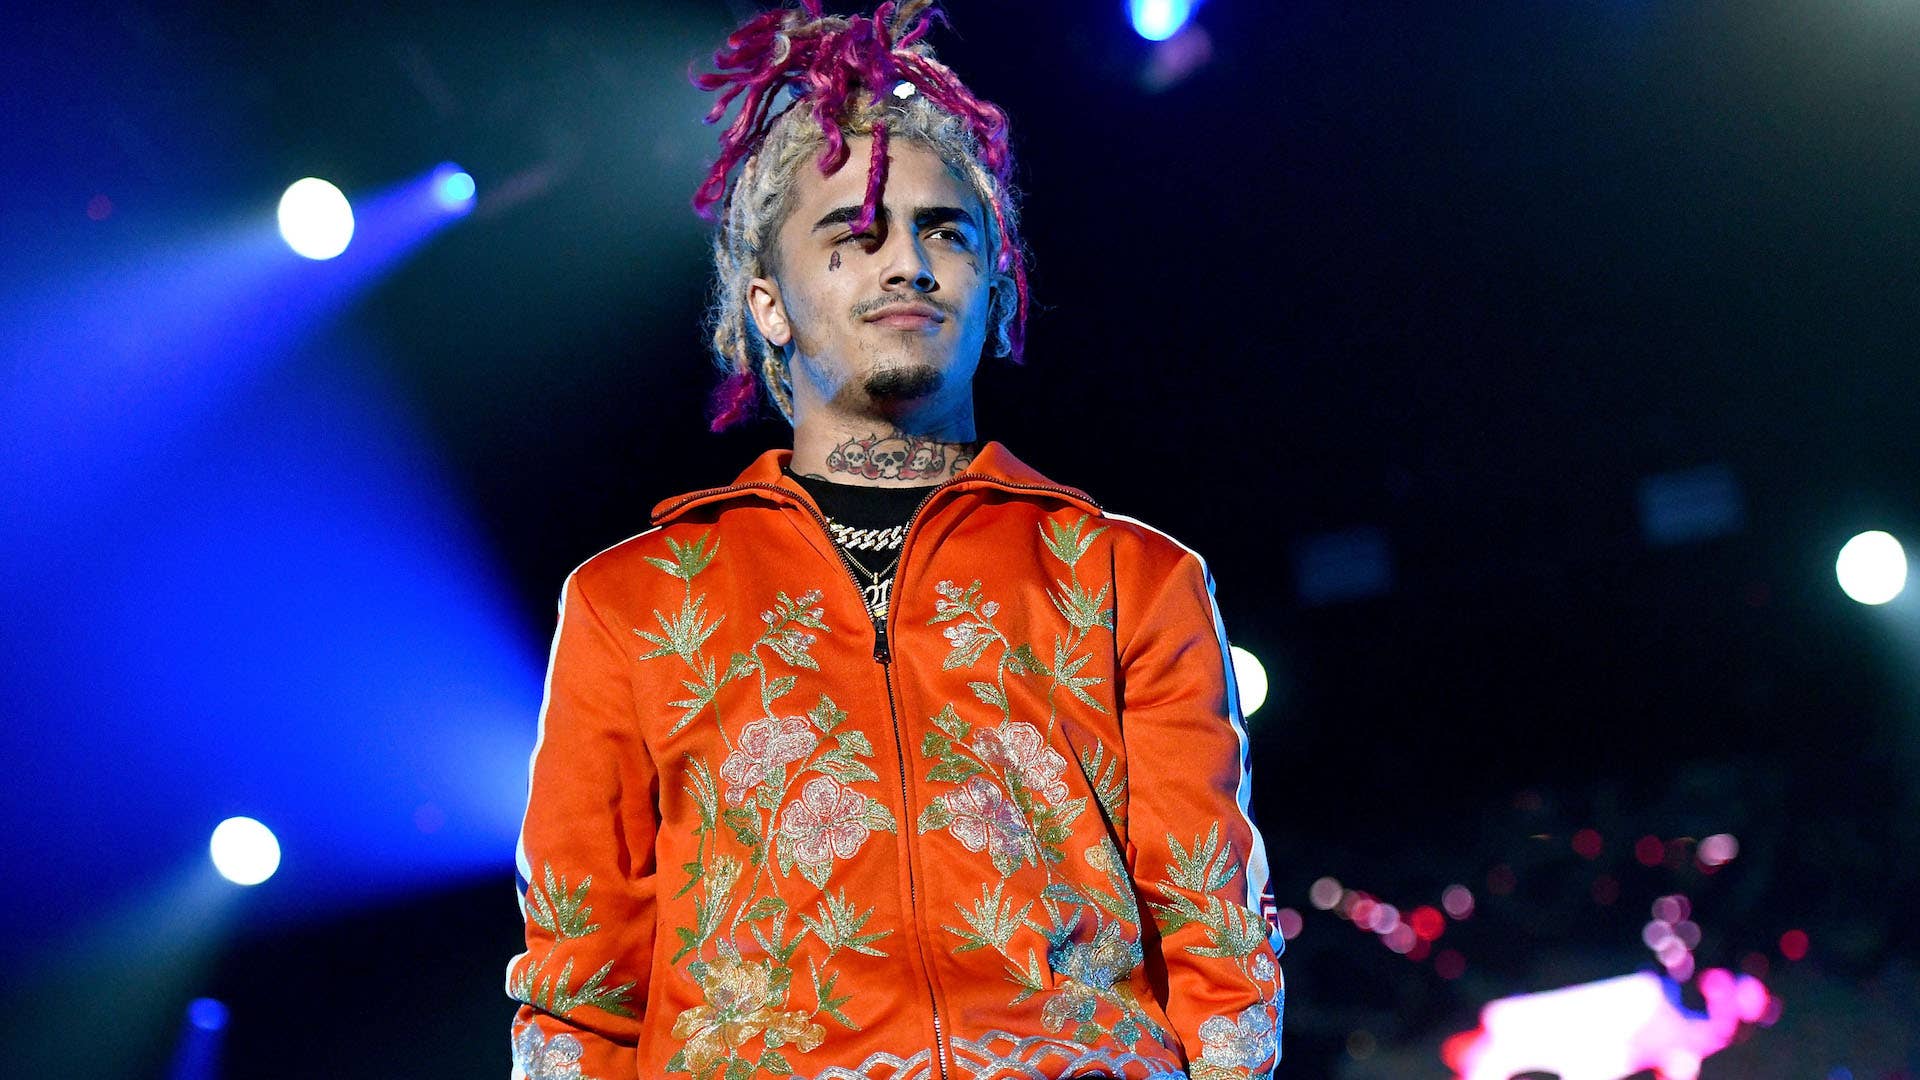 Lil Pump performs onstage during YG and Friend's Nighttime Boogie Concert.